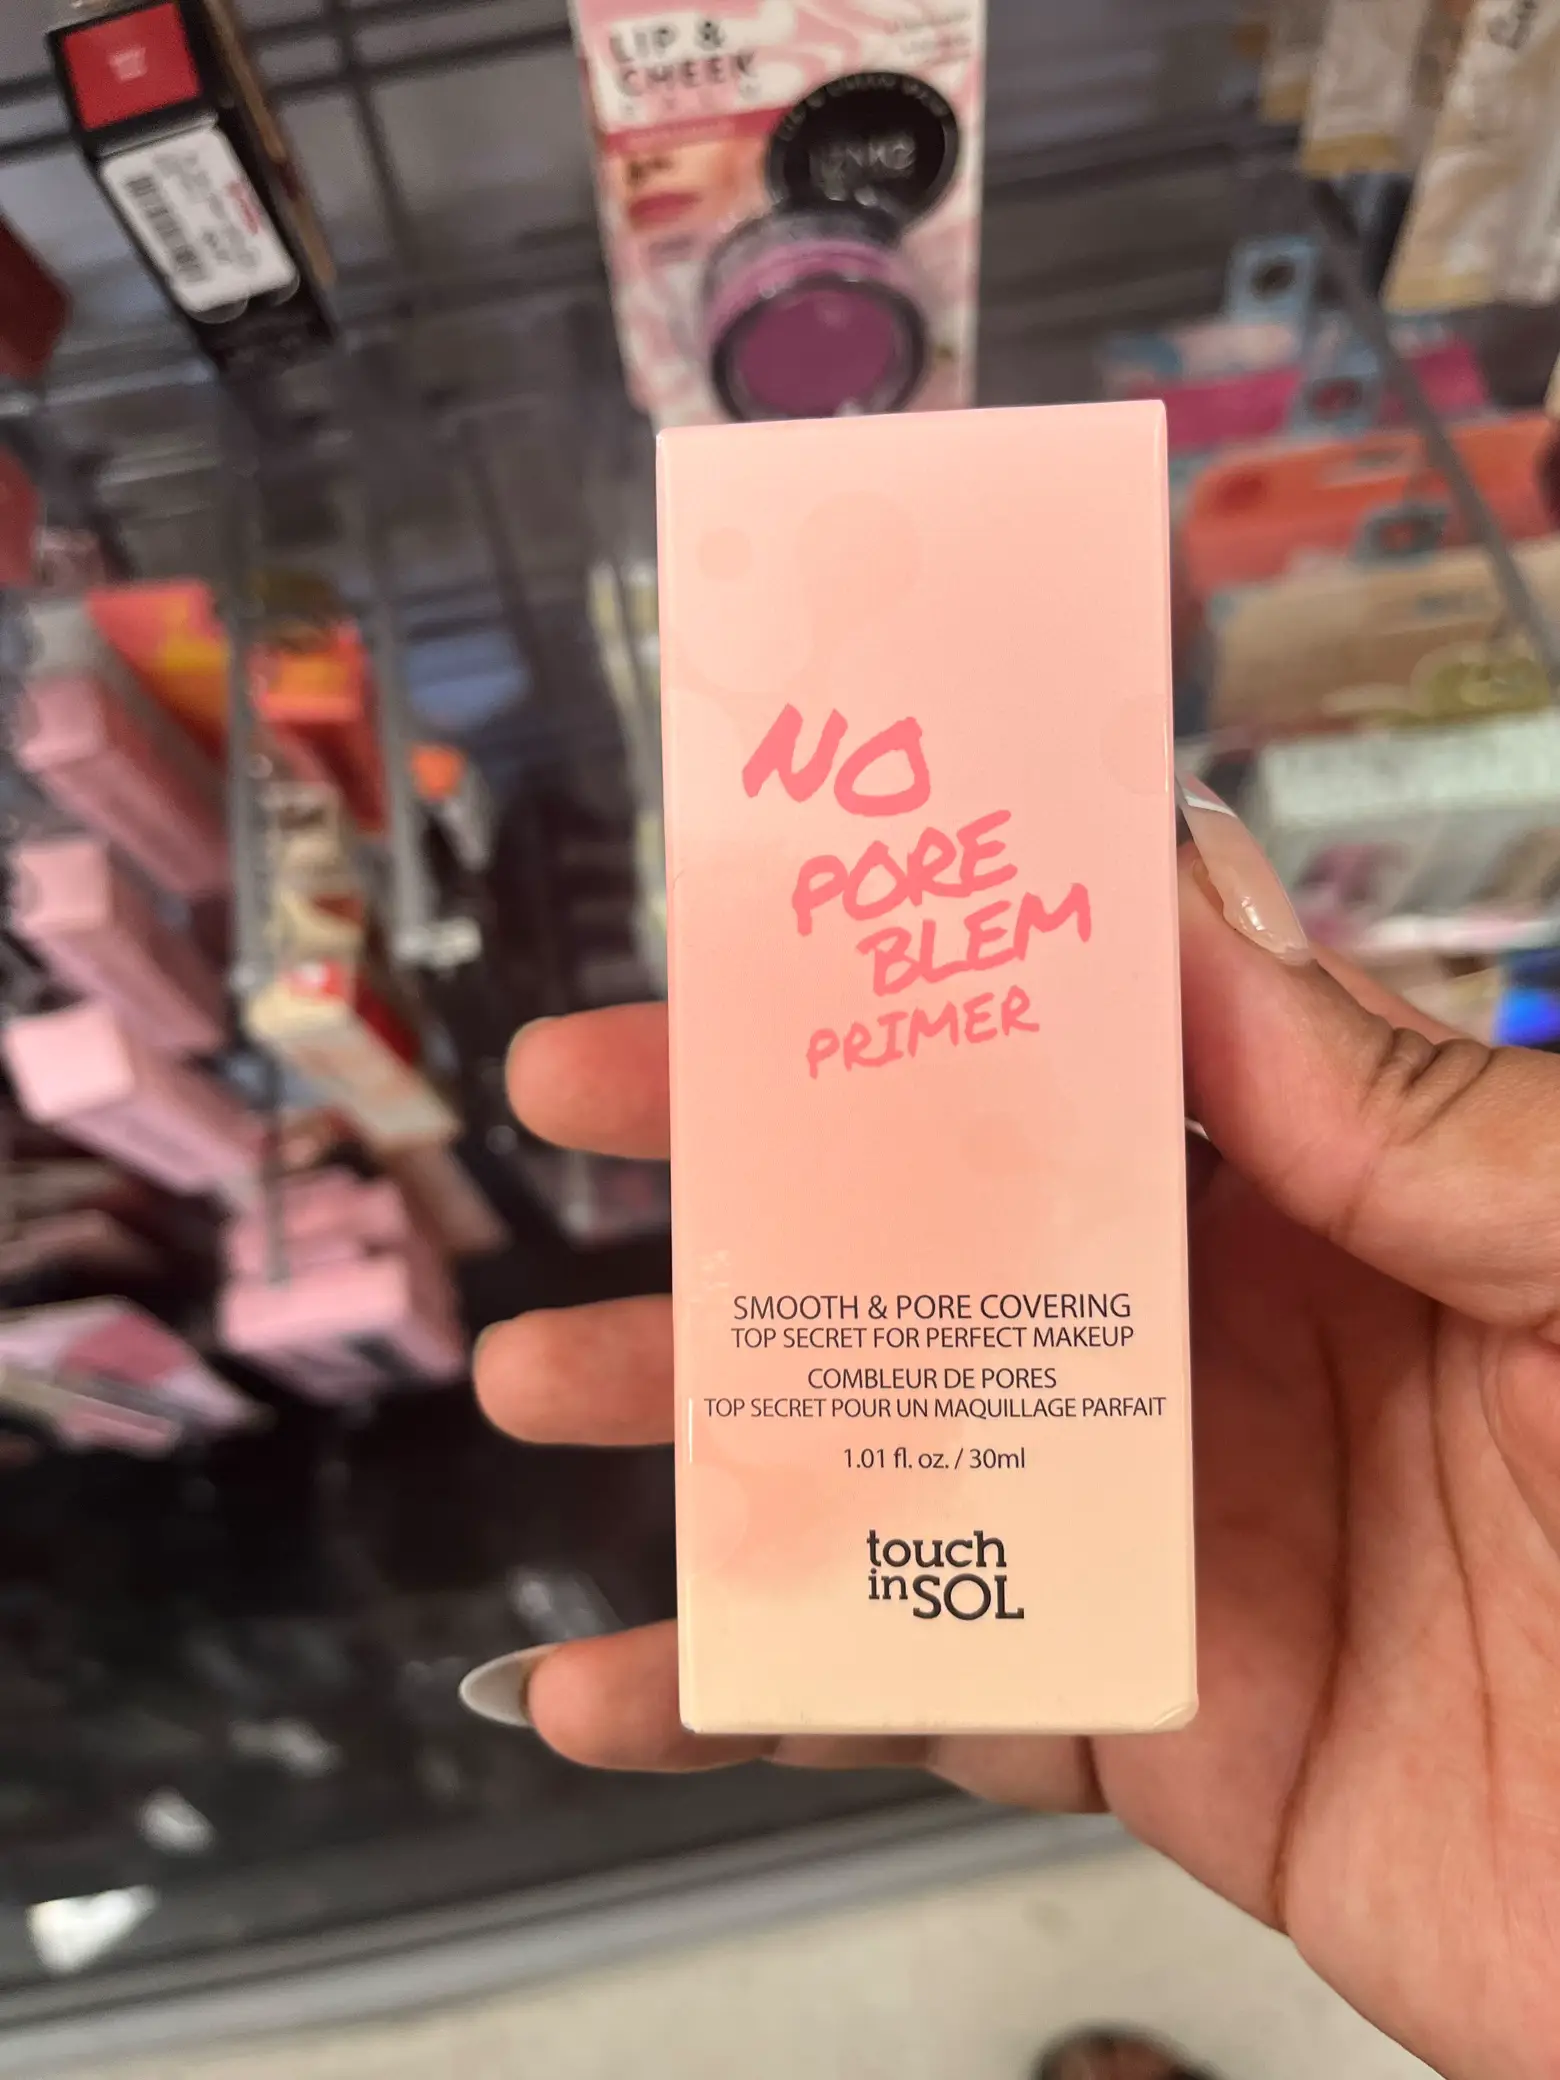 TJ Maxx Find, Gallery posted by MoeLanecreative